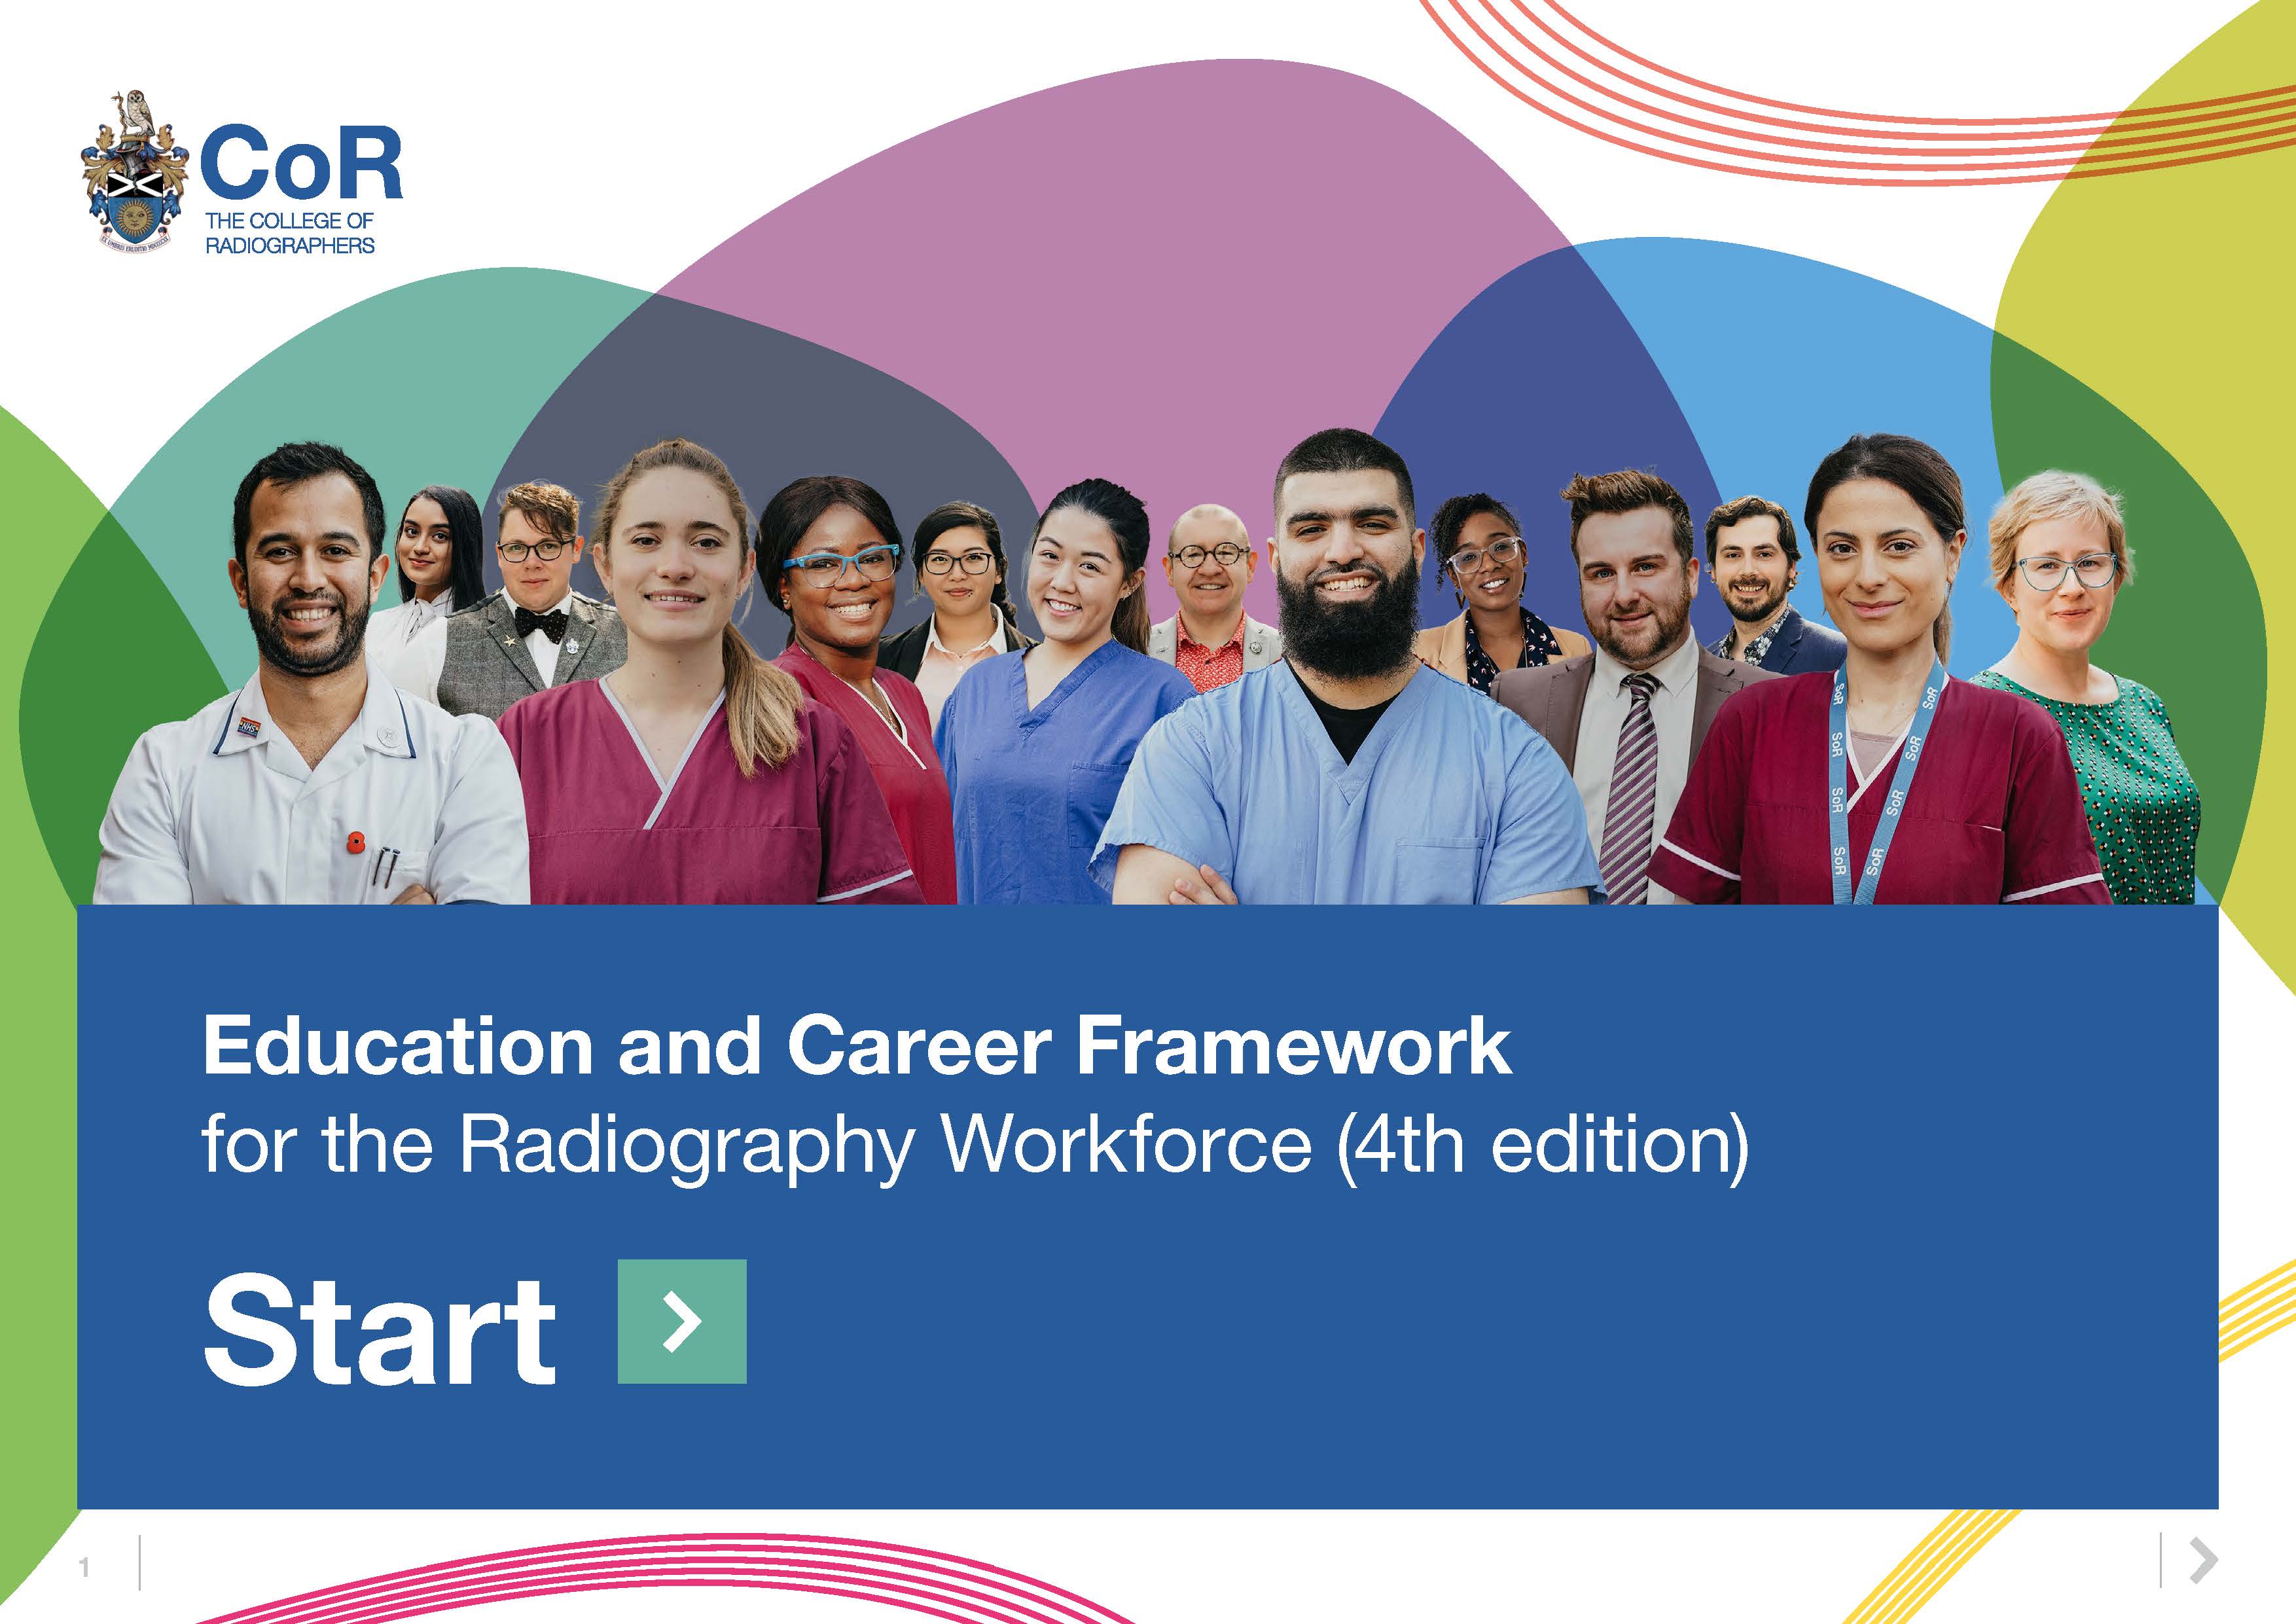 Explore the Education and Career Framework (4th Edition)